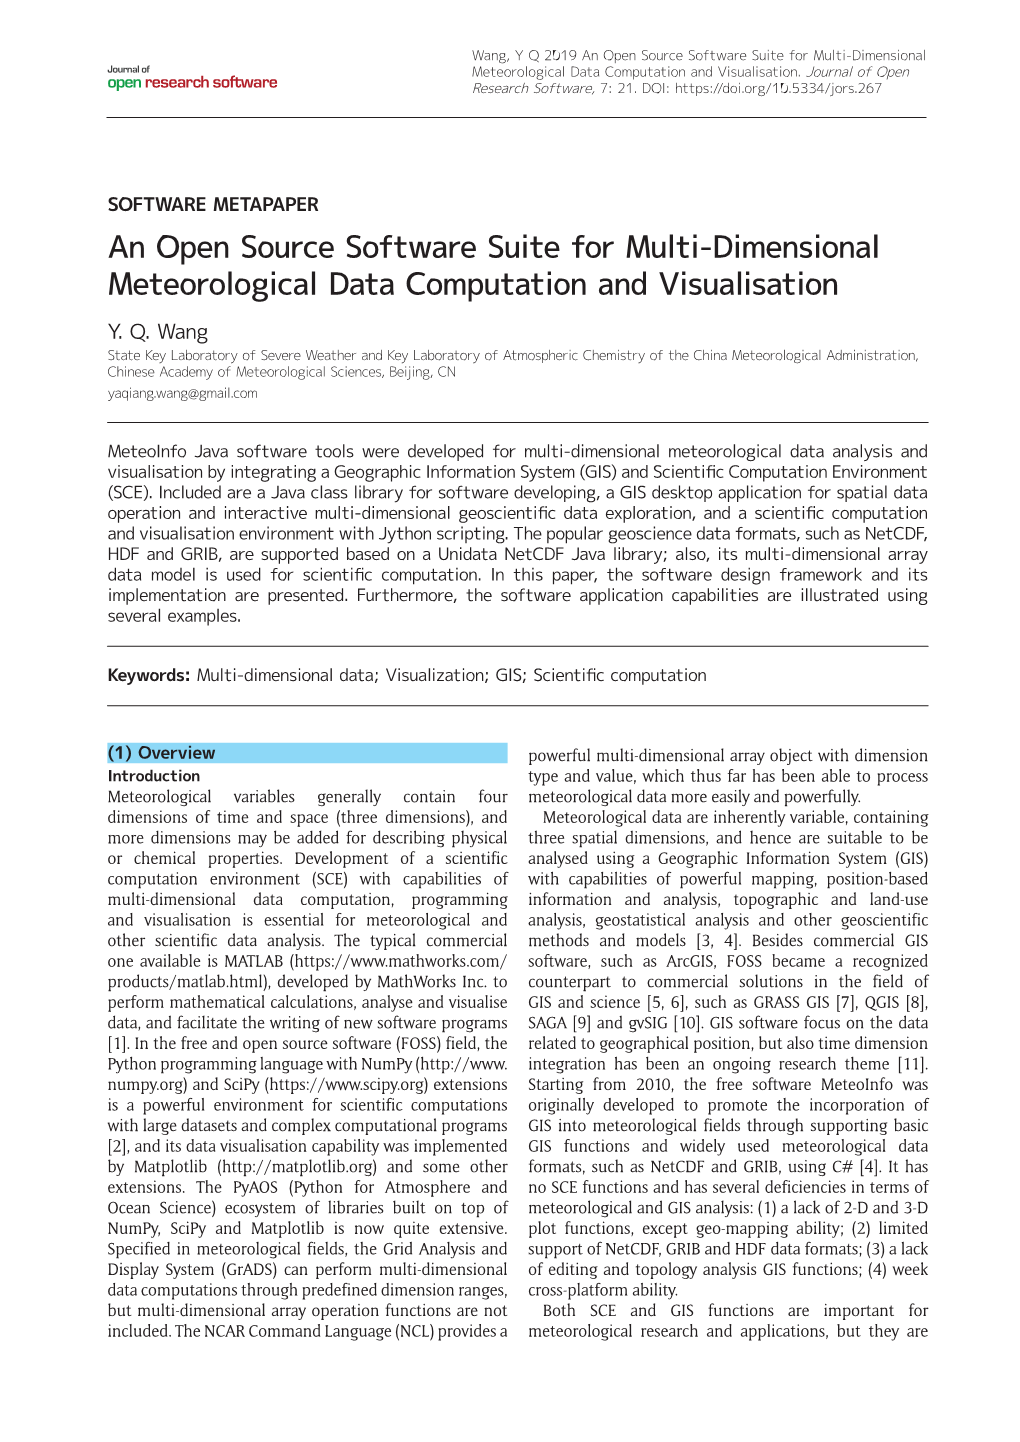 An Open Source Software Suite for Multi-Dimensional Meteorological Data Computation and Visualisation Y